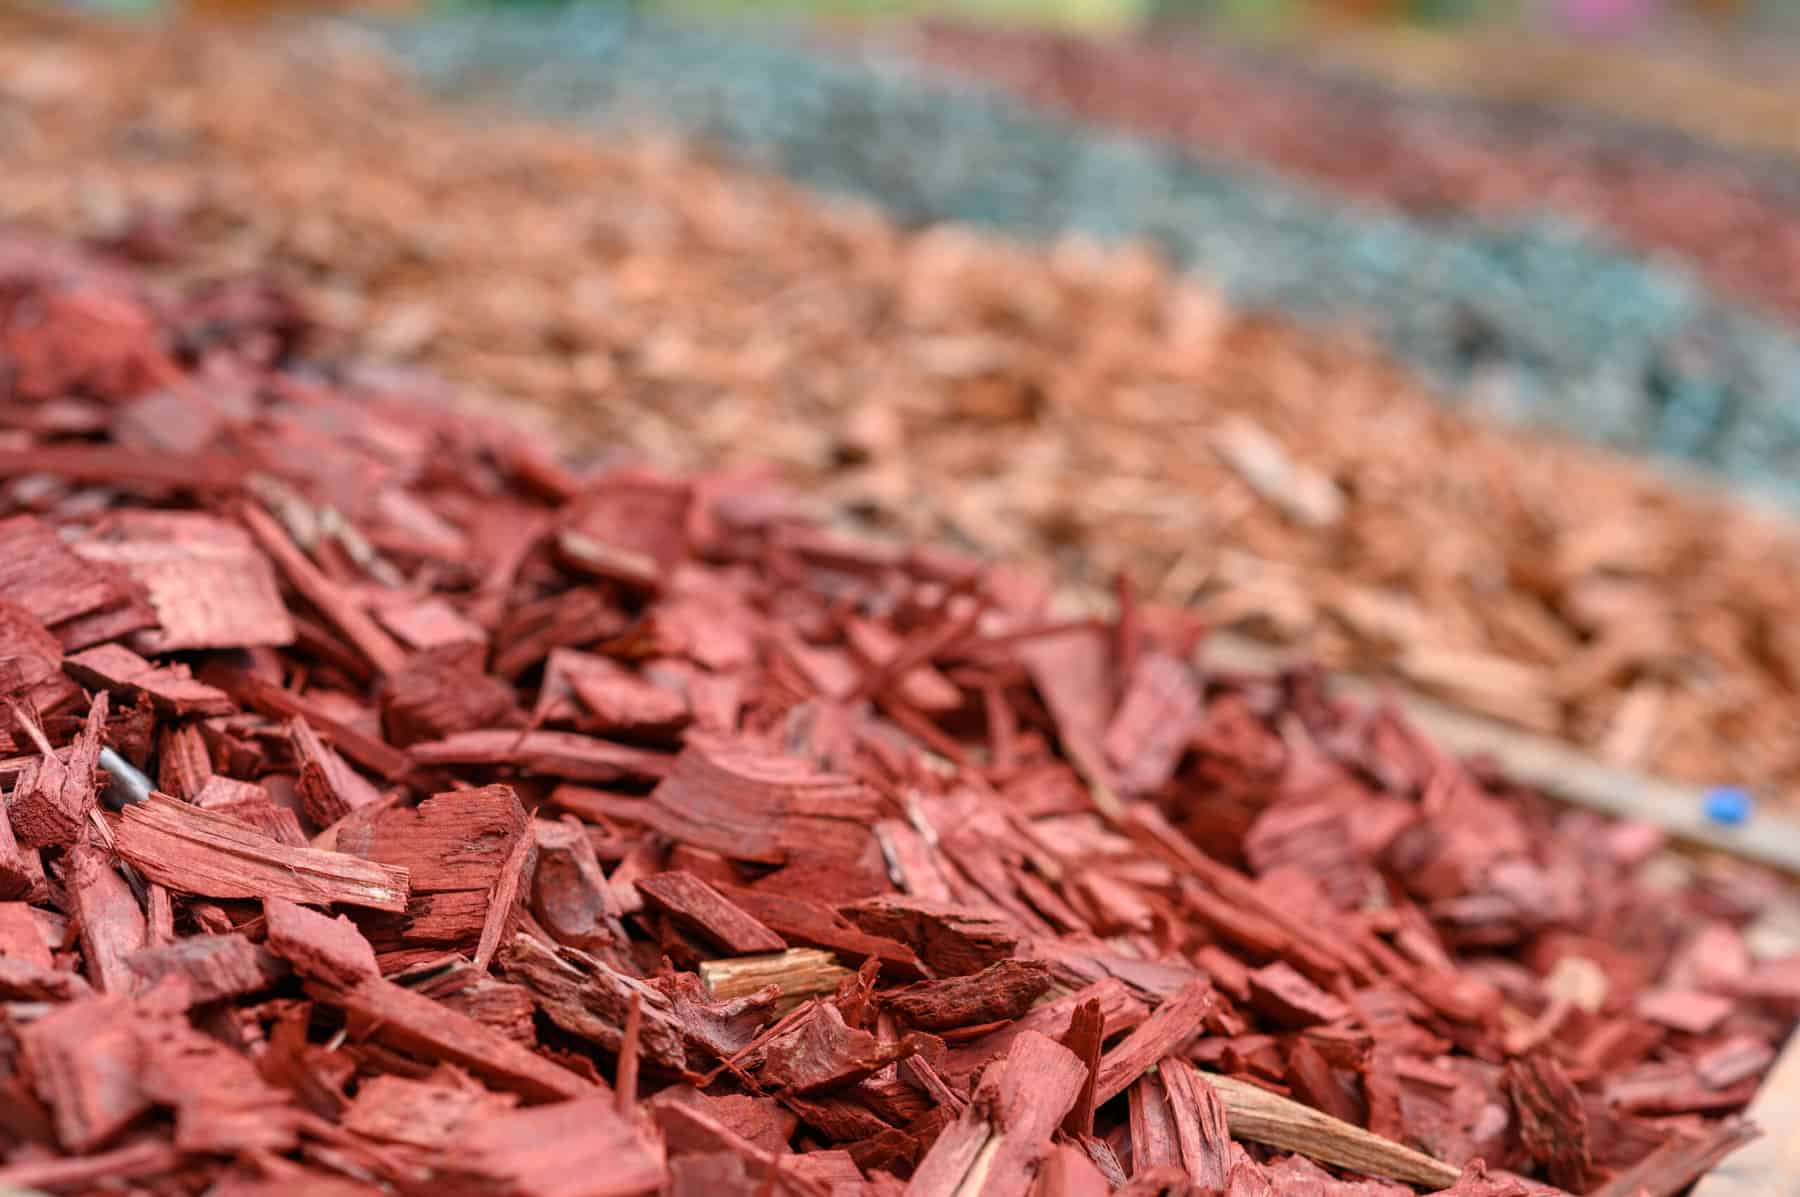 Mulch for decorating a private plot.